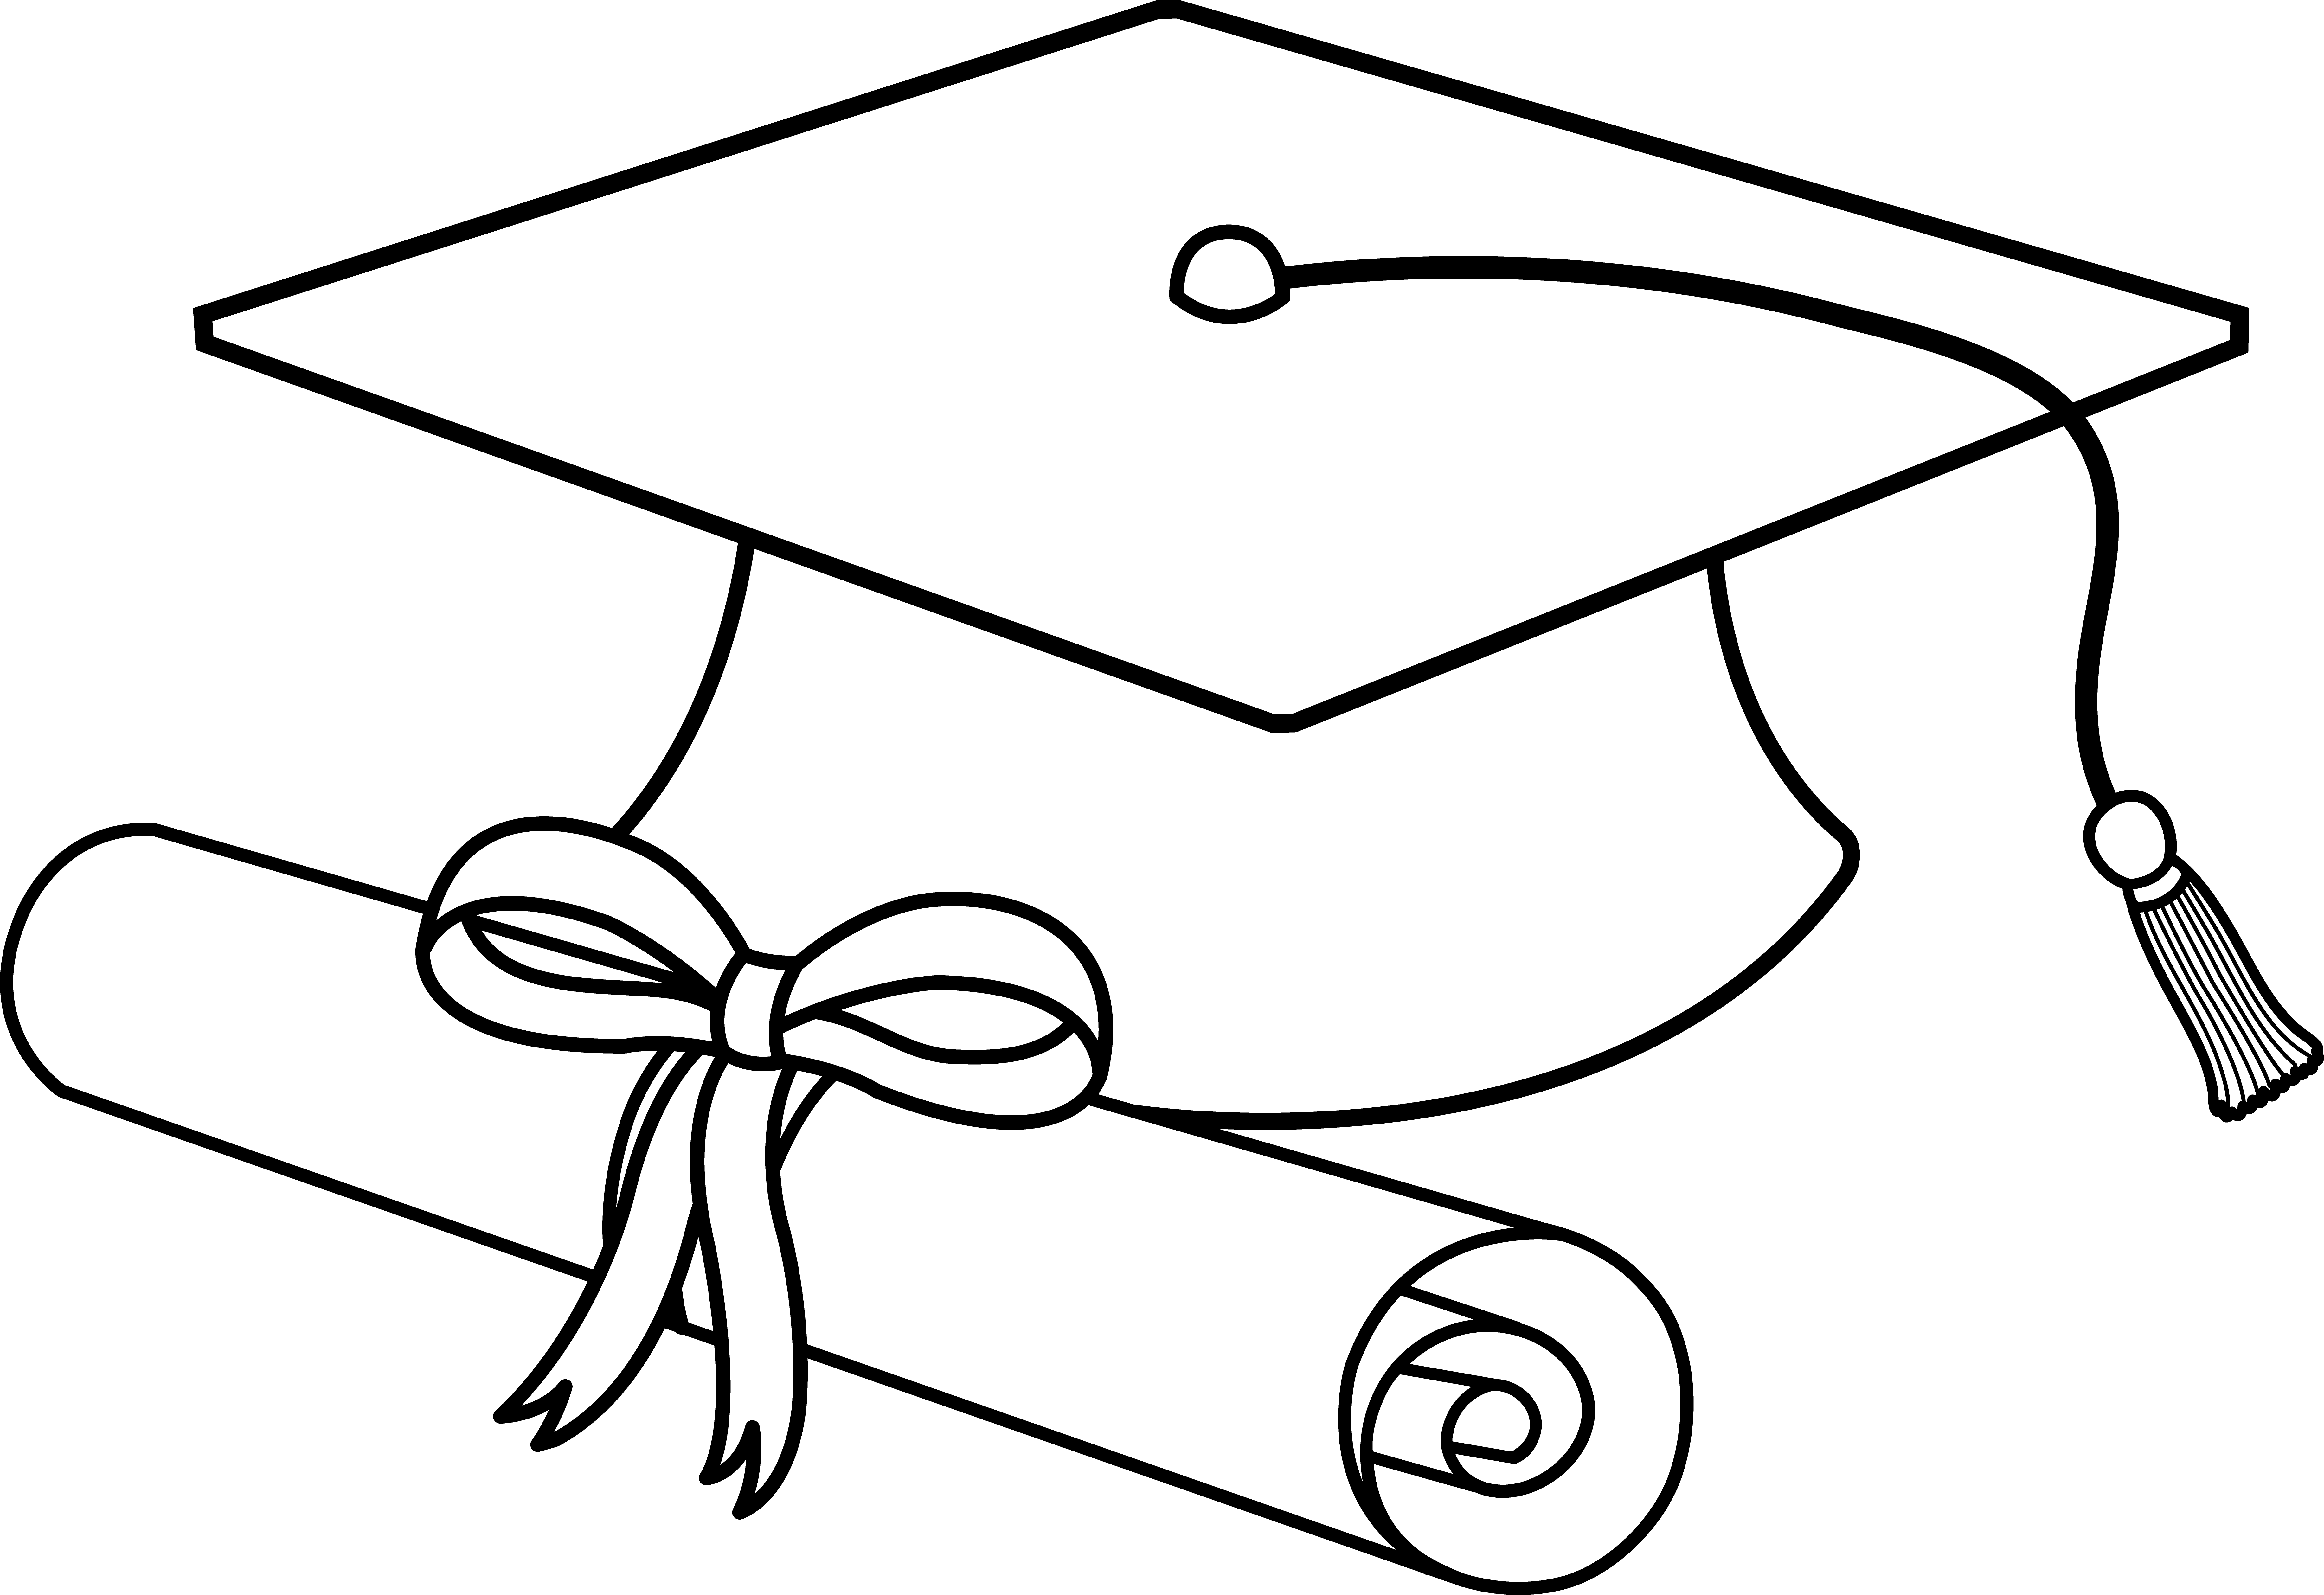 Graduation cap and gown clipart